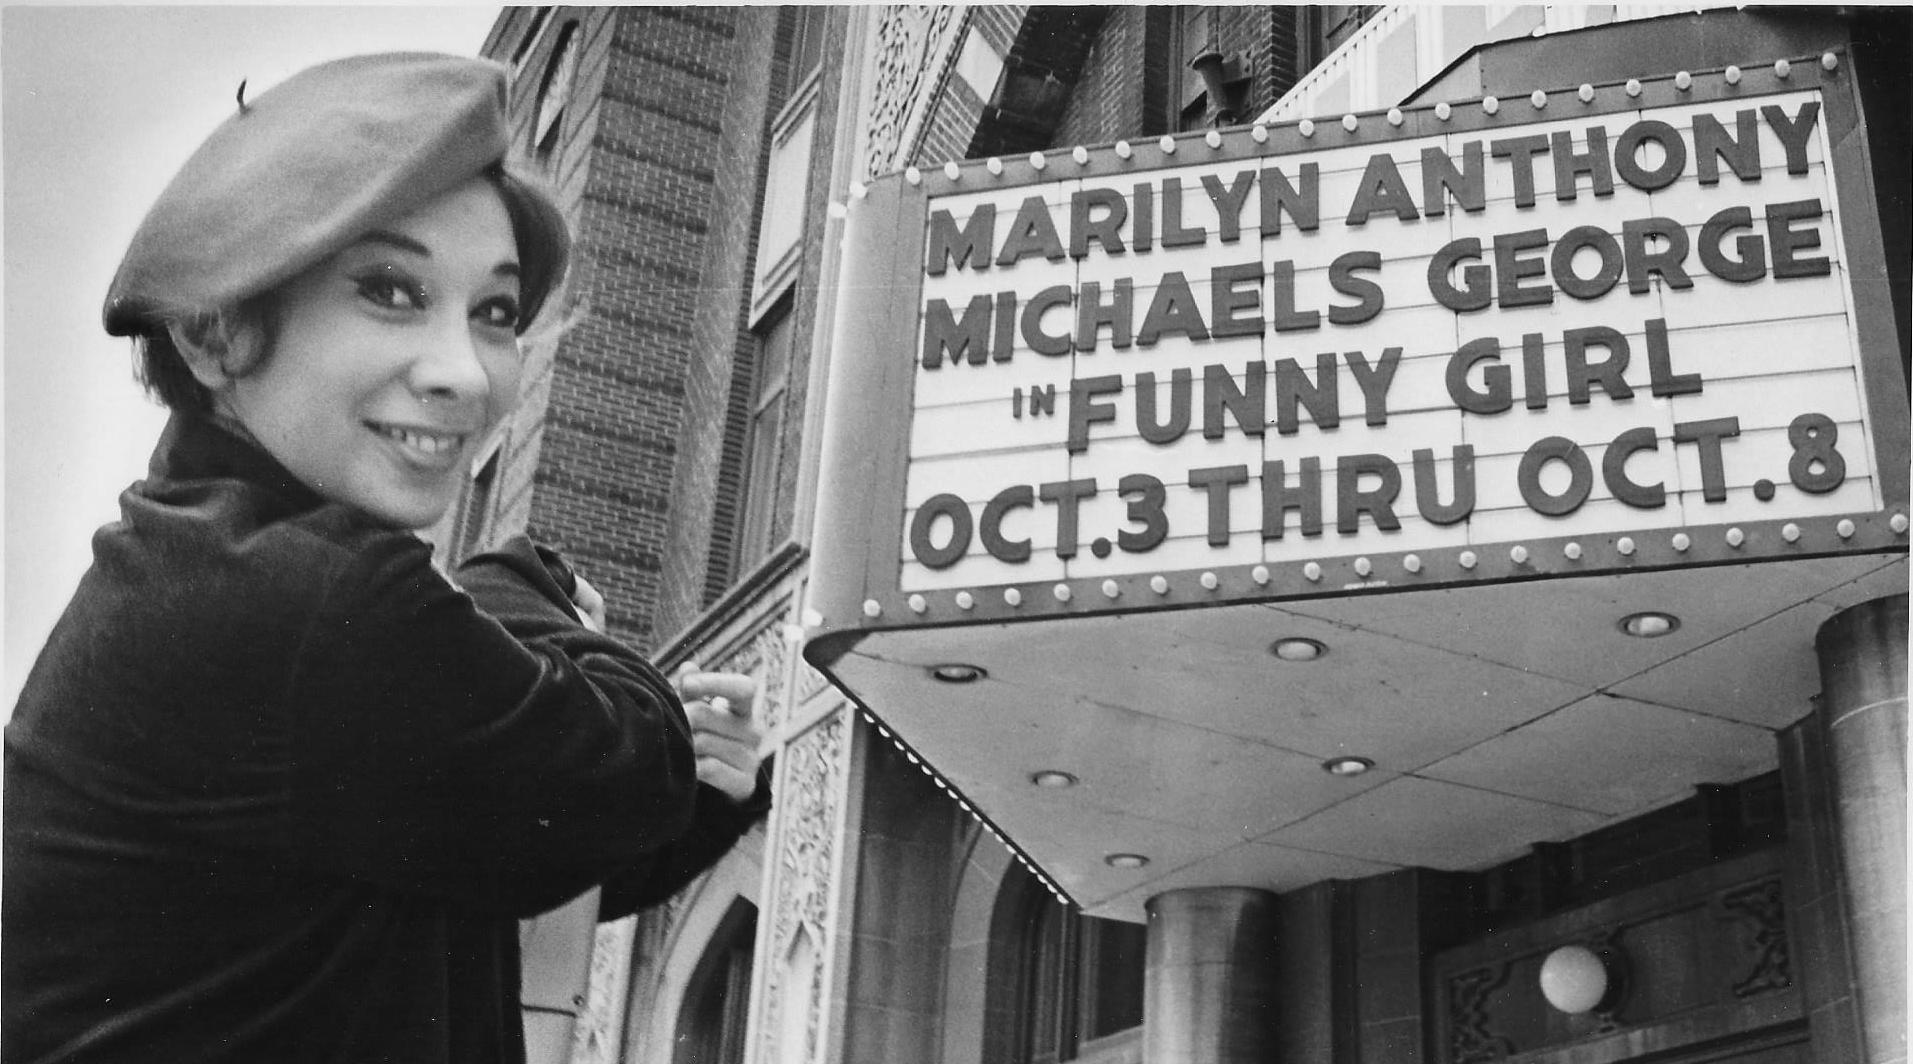 FUNNY GIRL MARQUEE